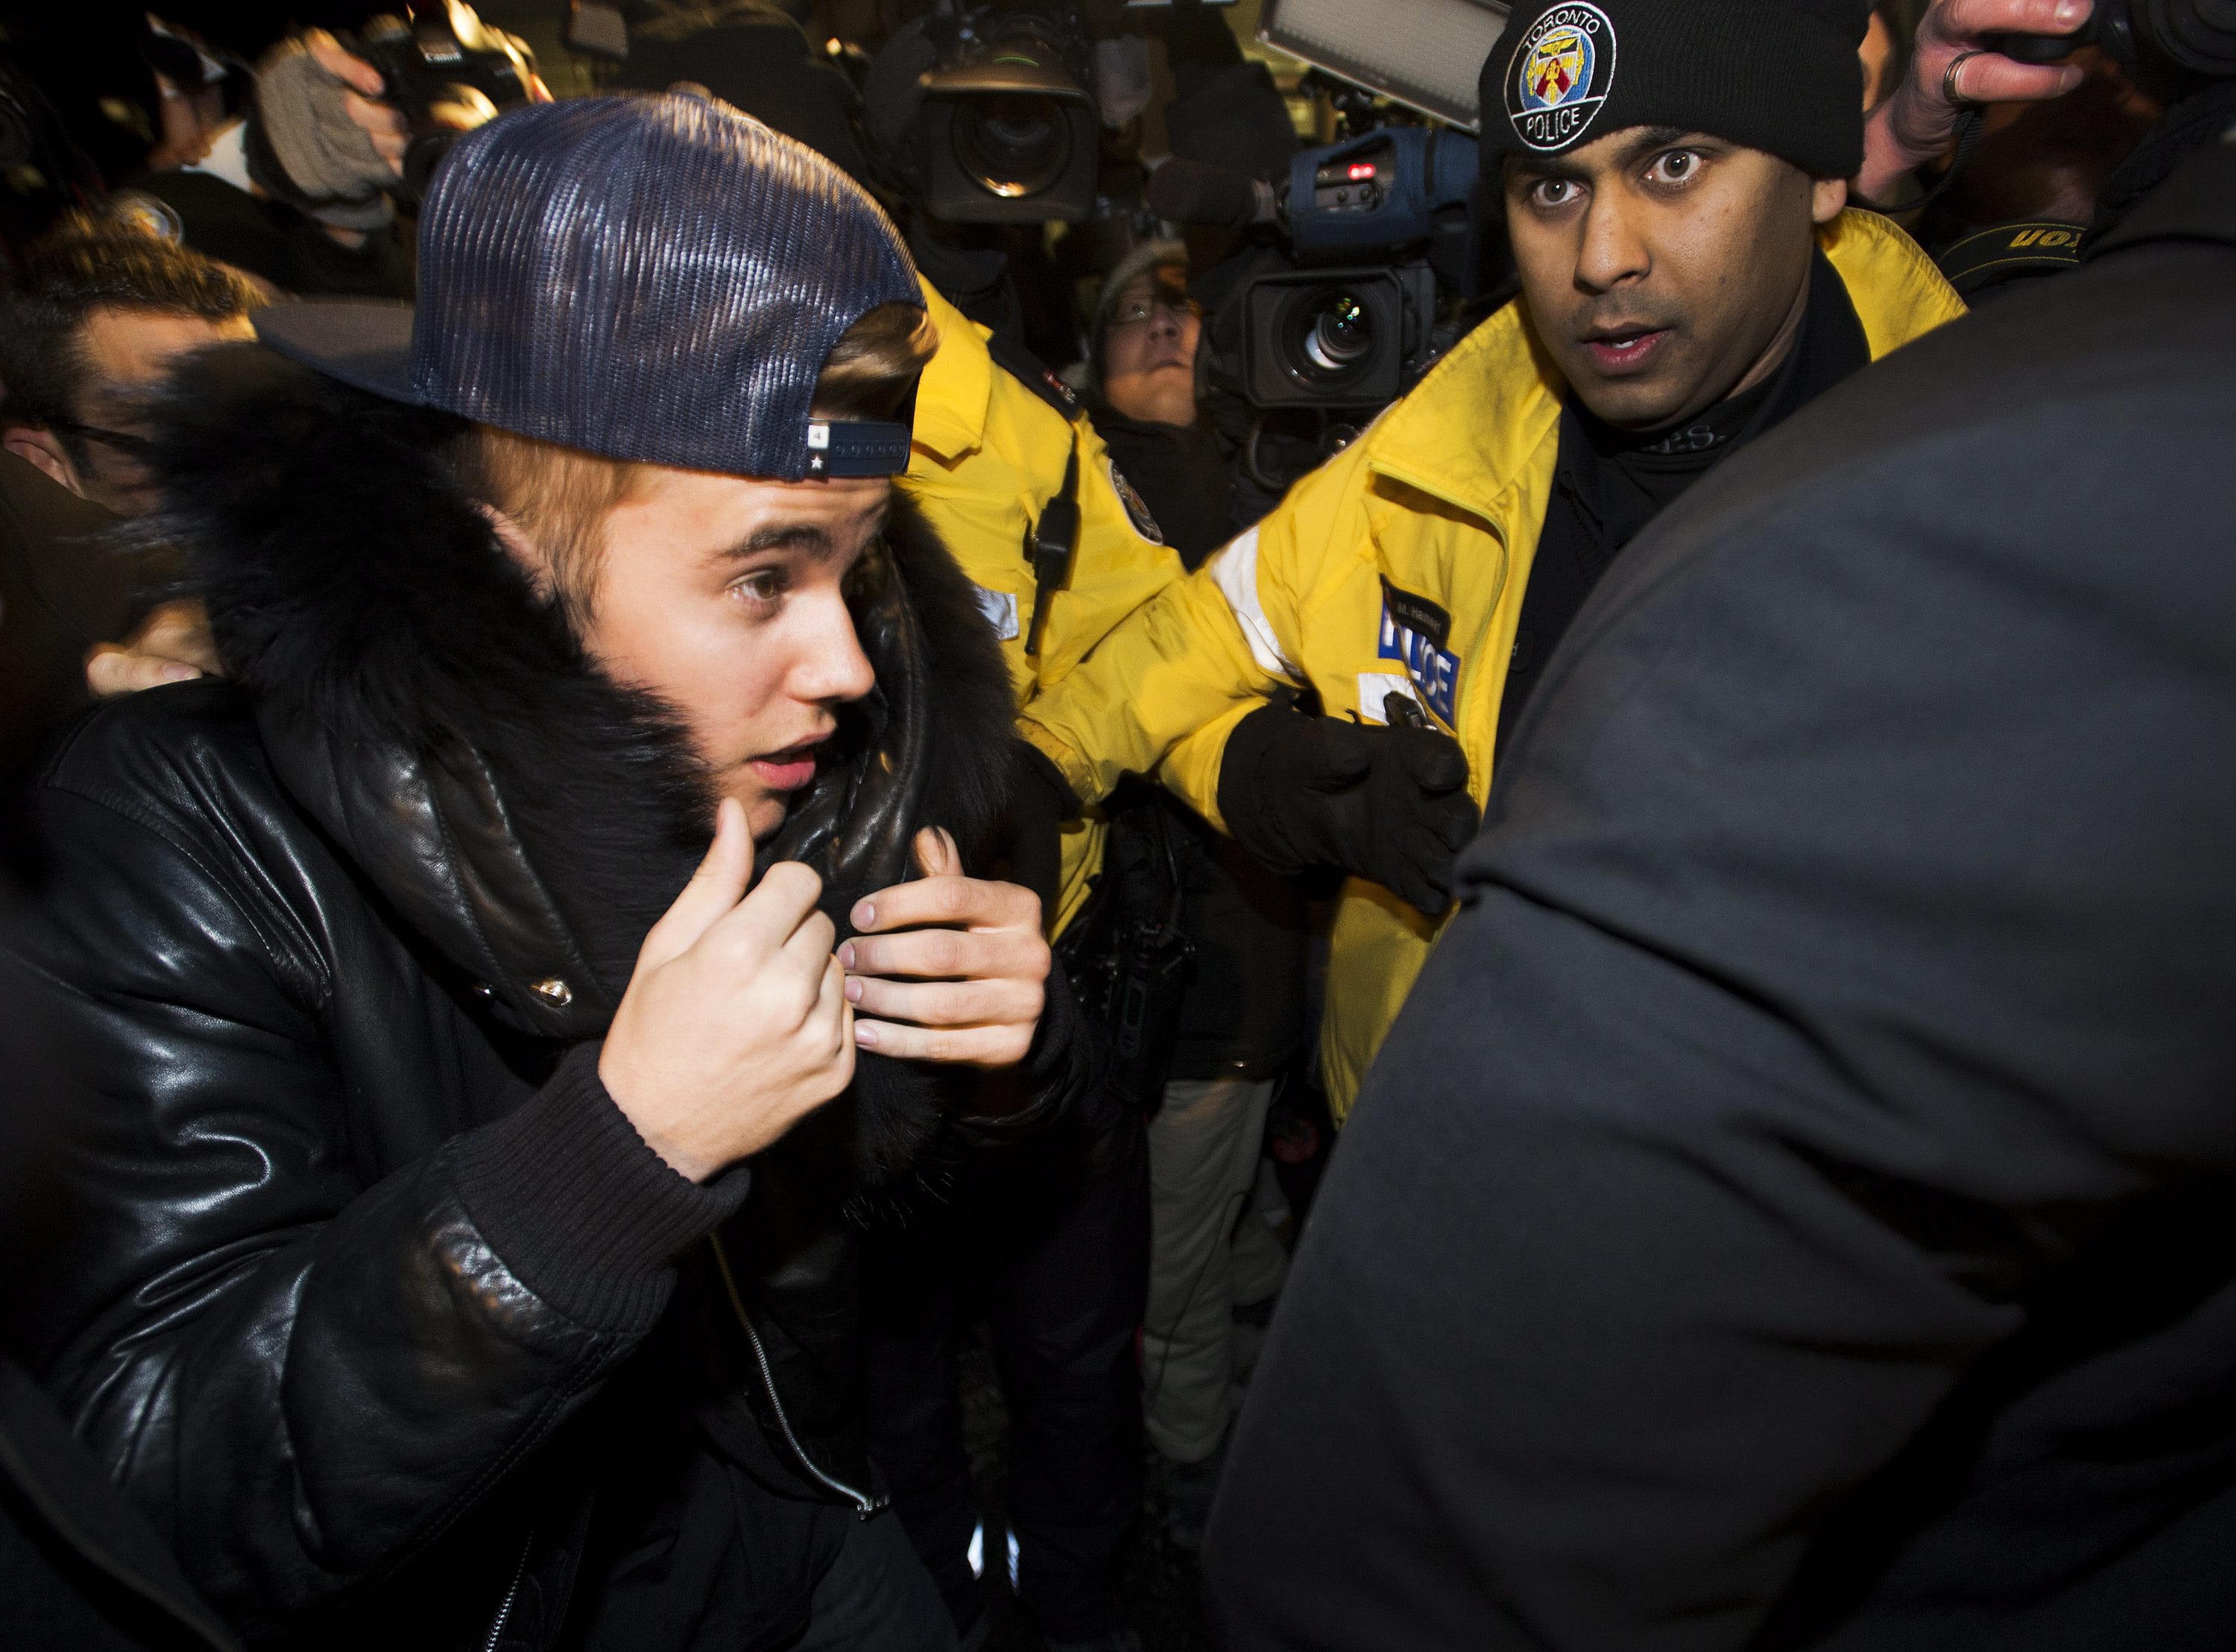 Canadian musician Justin Bieber is swarmed by media and police officers Wednesday as he turns himself in to city police for an expected assault charge, in Toronto.